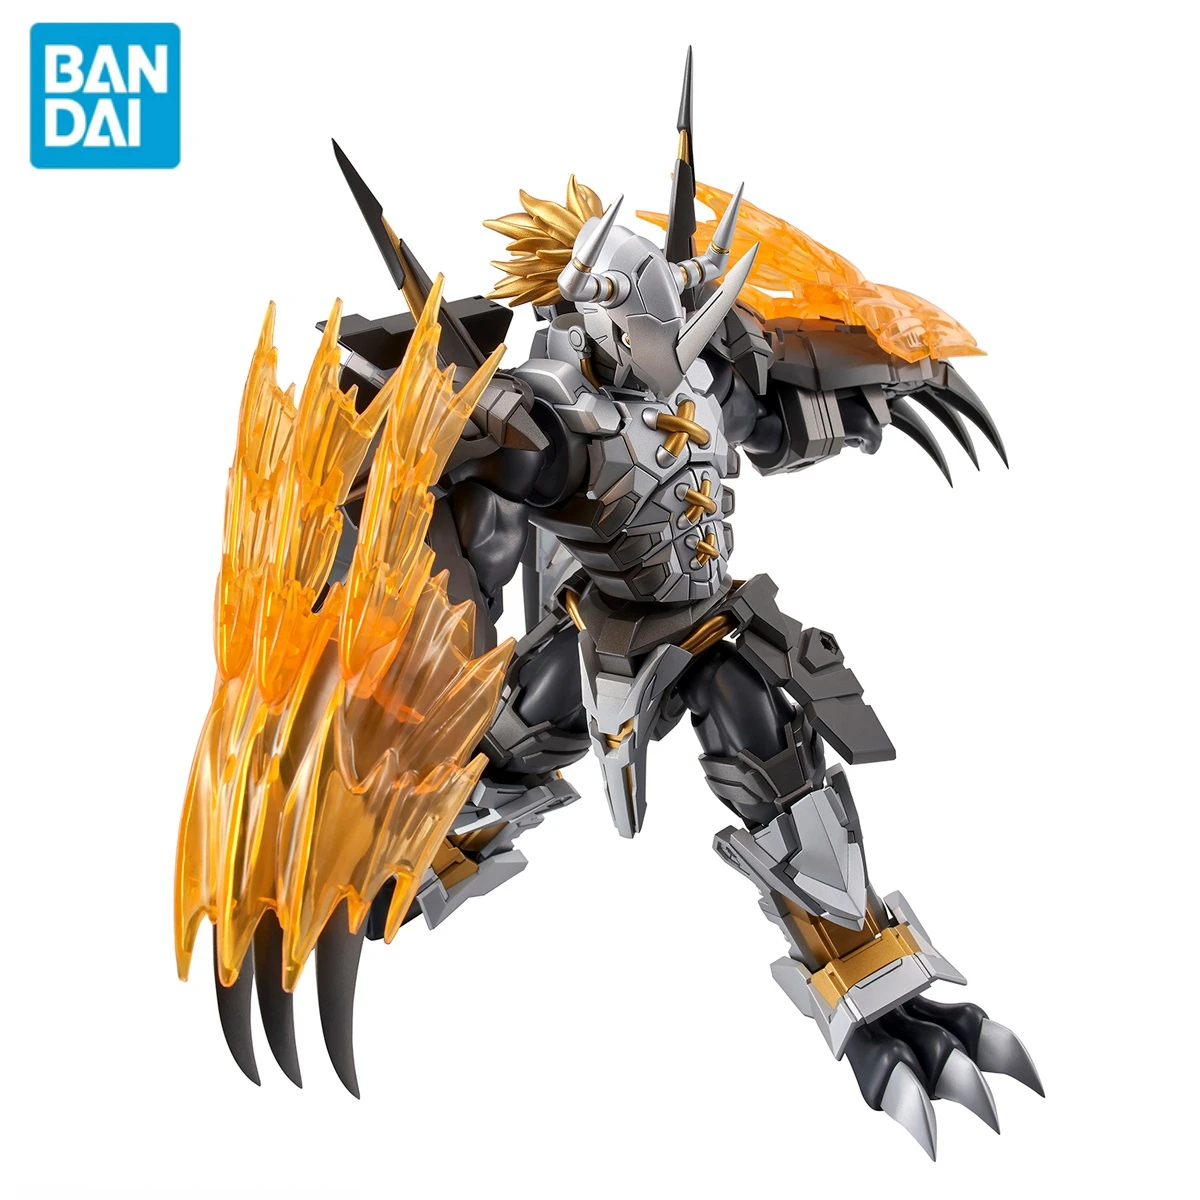 

Original Bandai Digimon Adventure Black War Greymon FRS Figure-rise Assembly Collectable Anime Action Figures Toys for Children